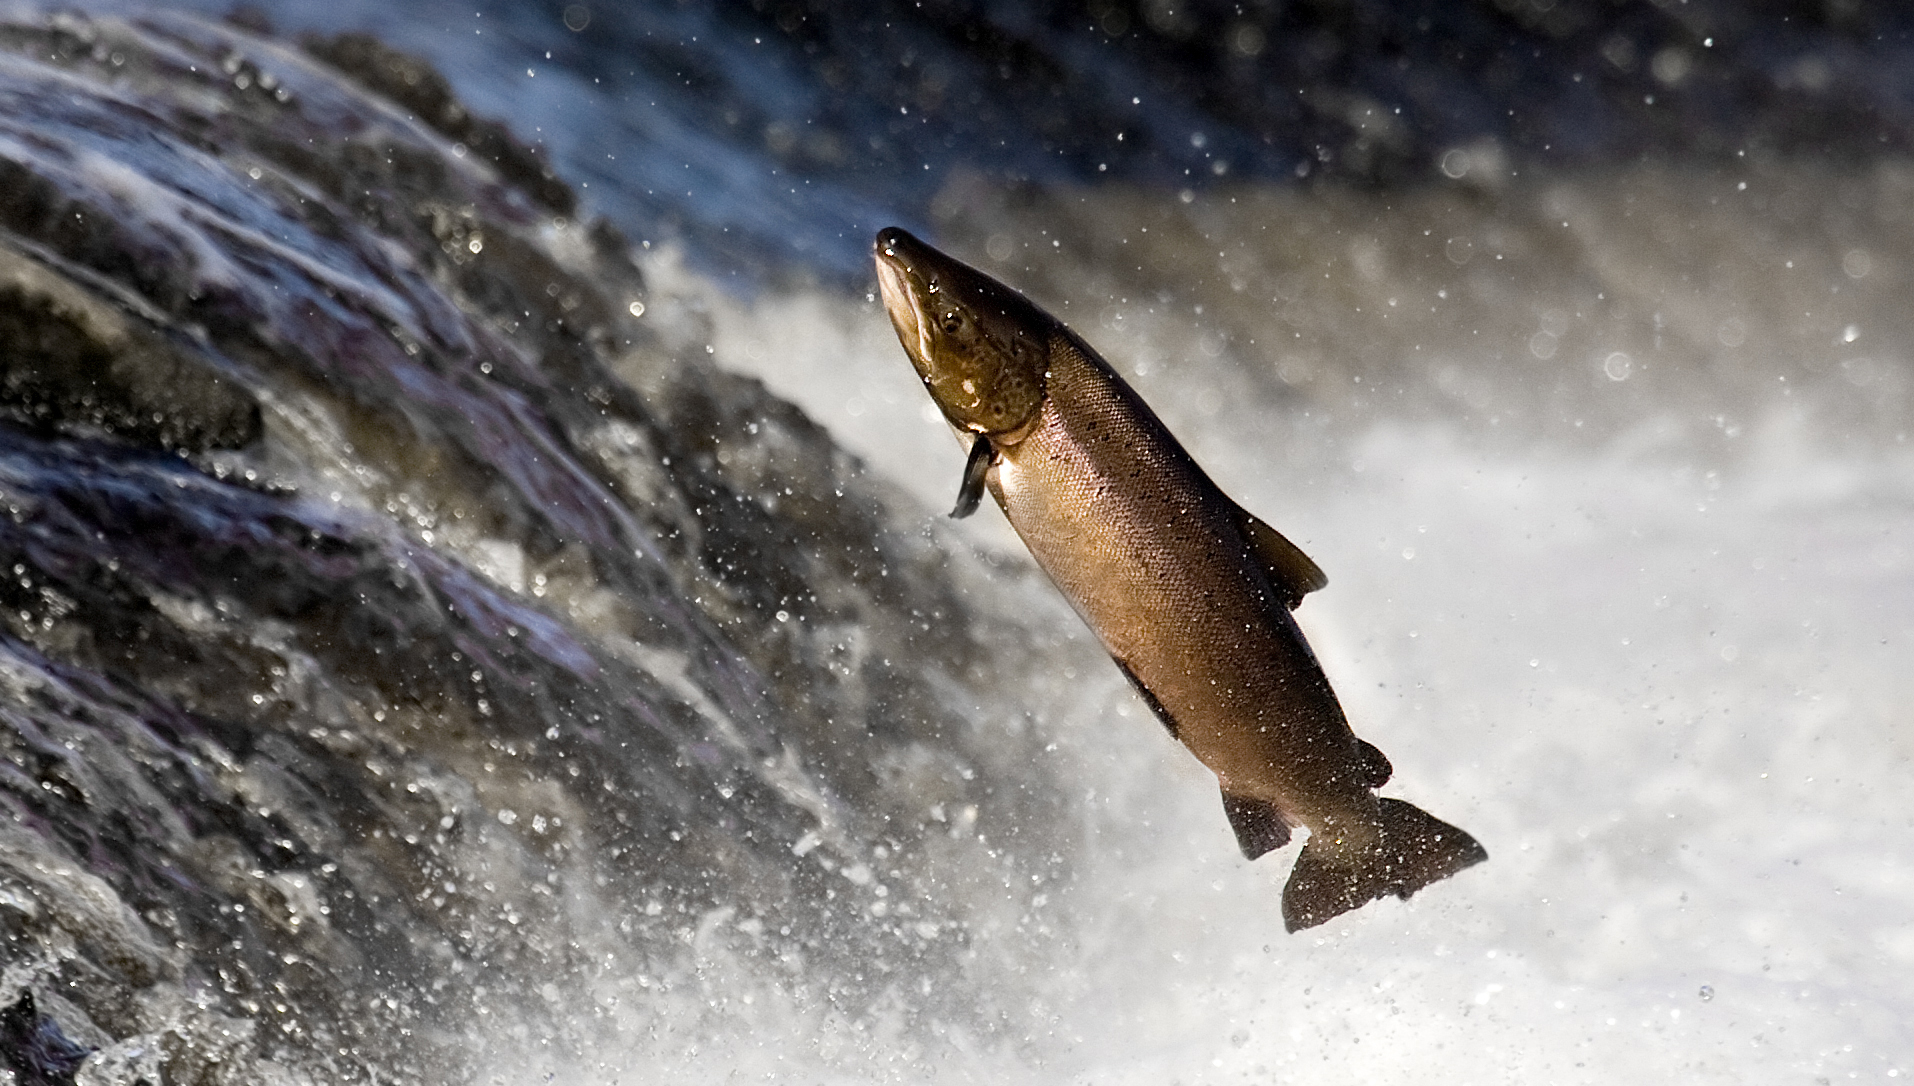 salmon leaping from water, in air, with water spray behind it